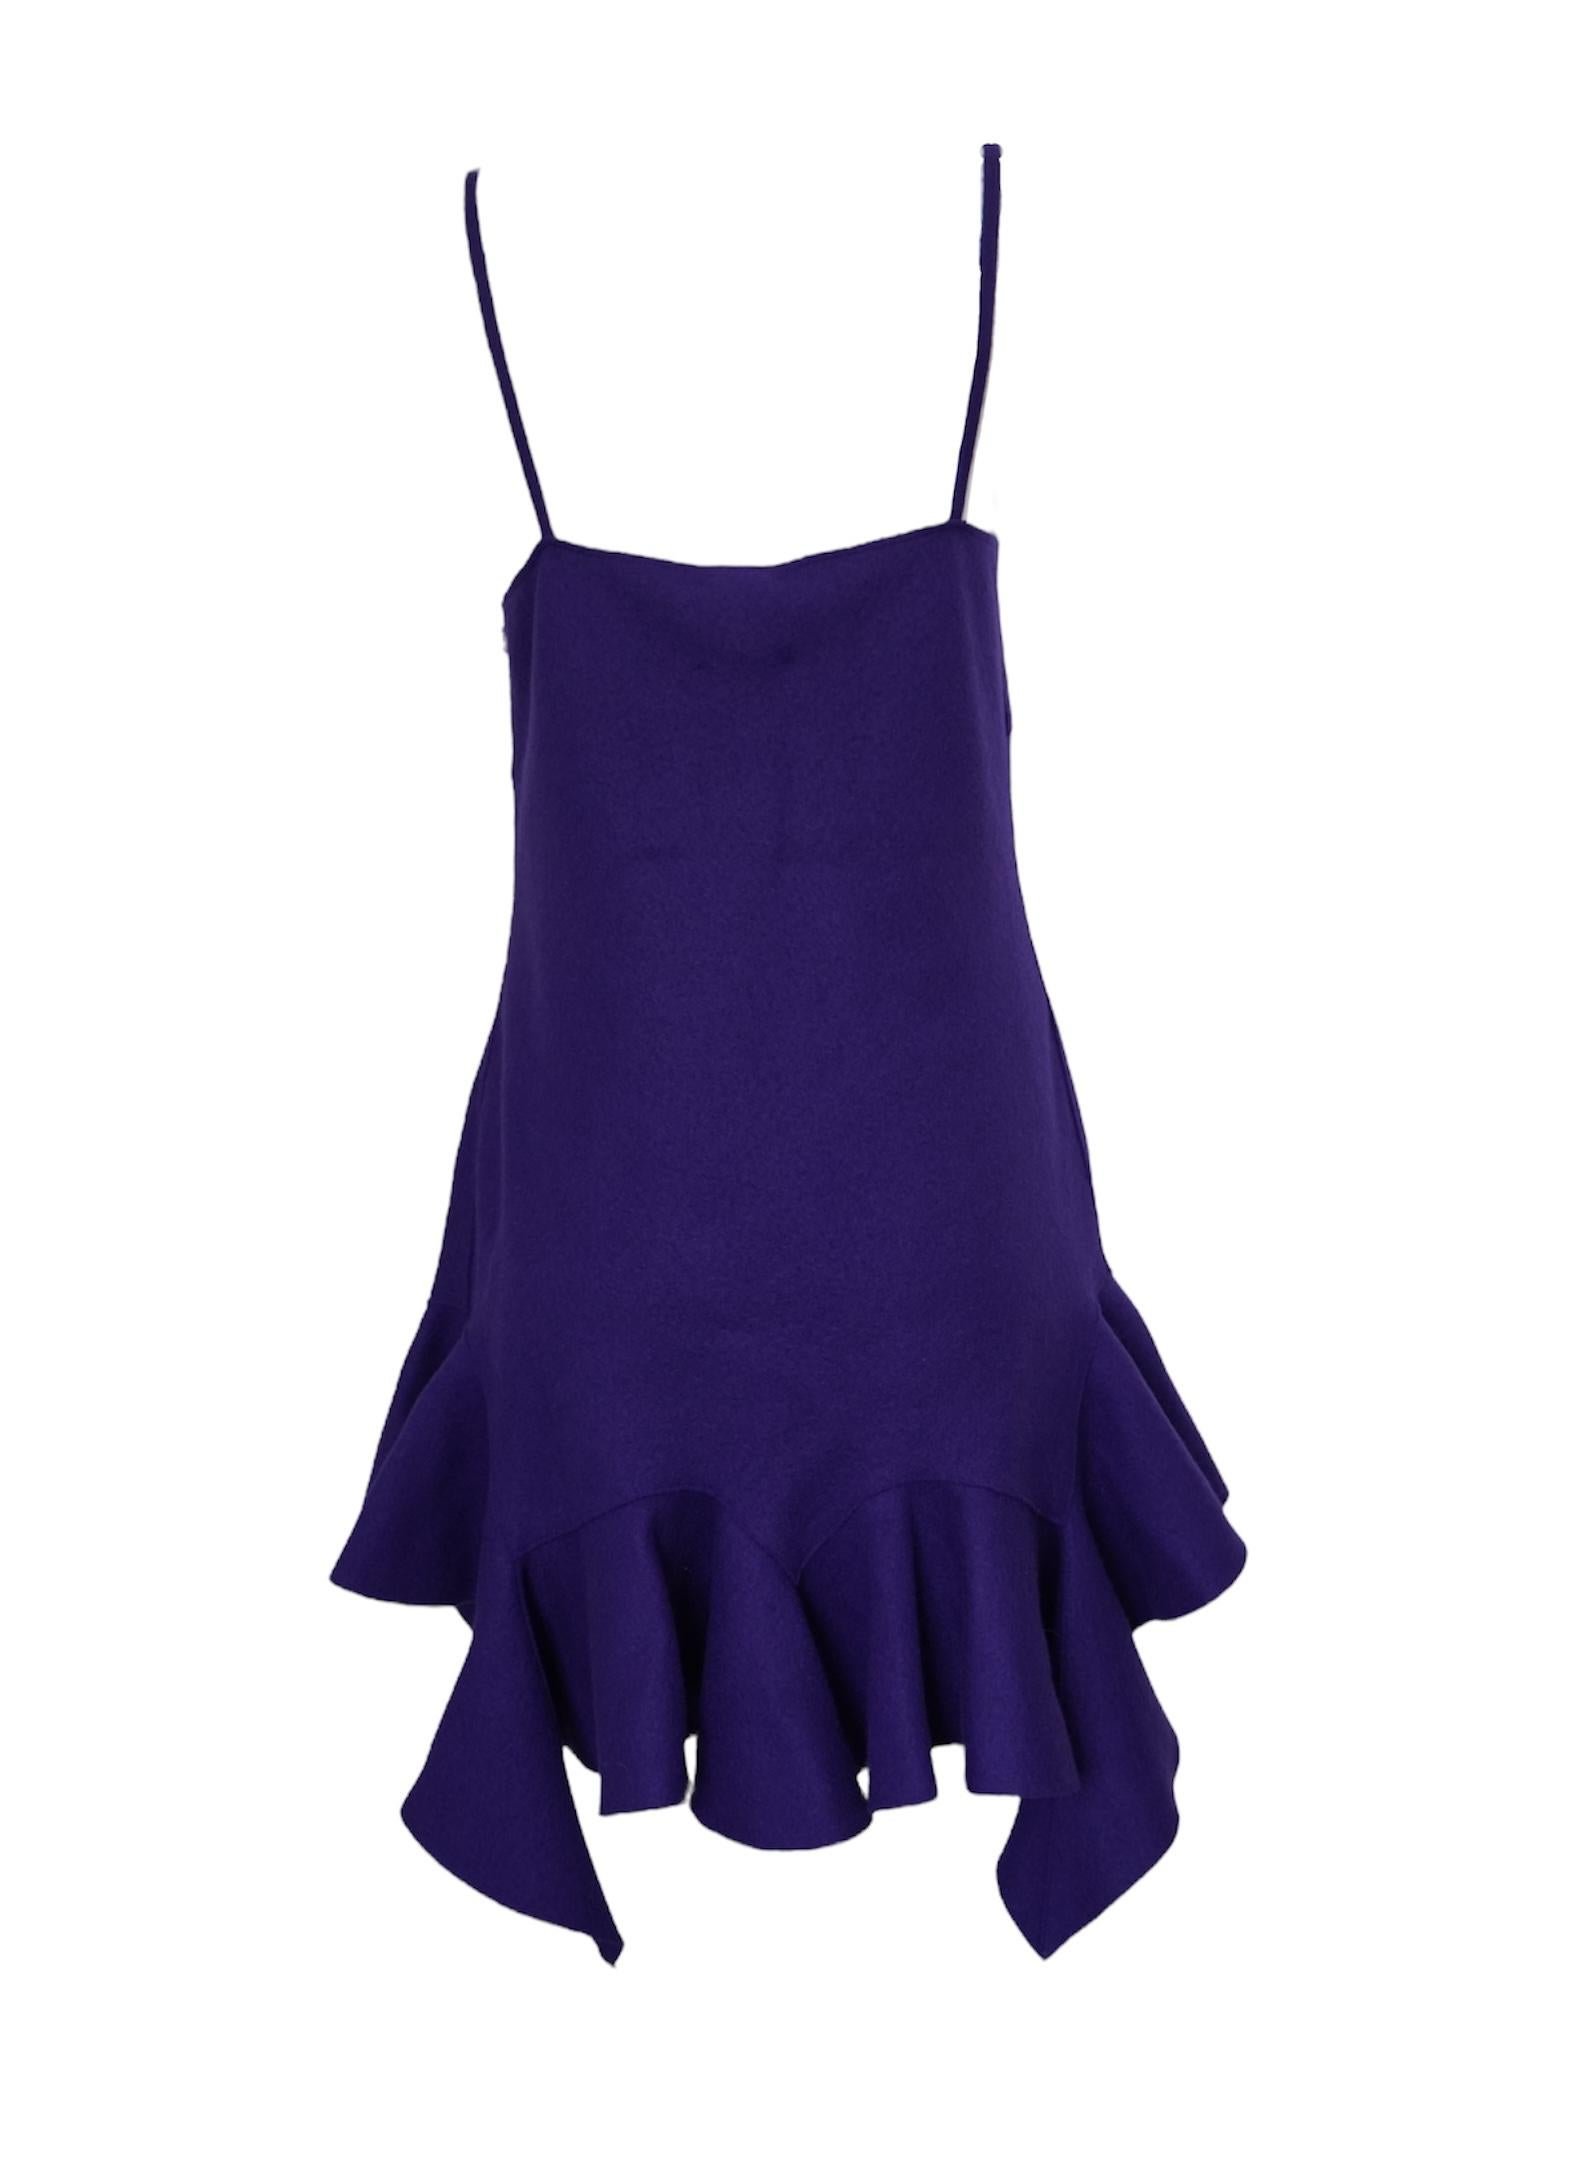 Givenchy Ruffle Wool Purple Mini Dress sz M In New Condition For Sale In Beverly Hills, CA